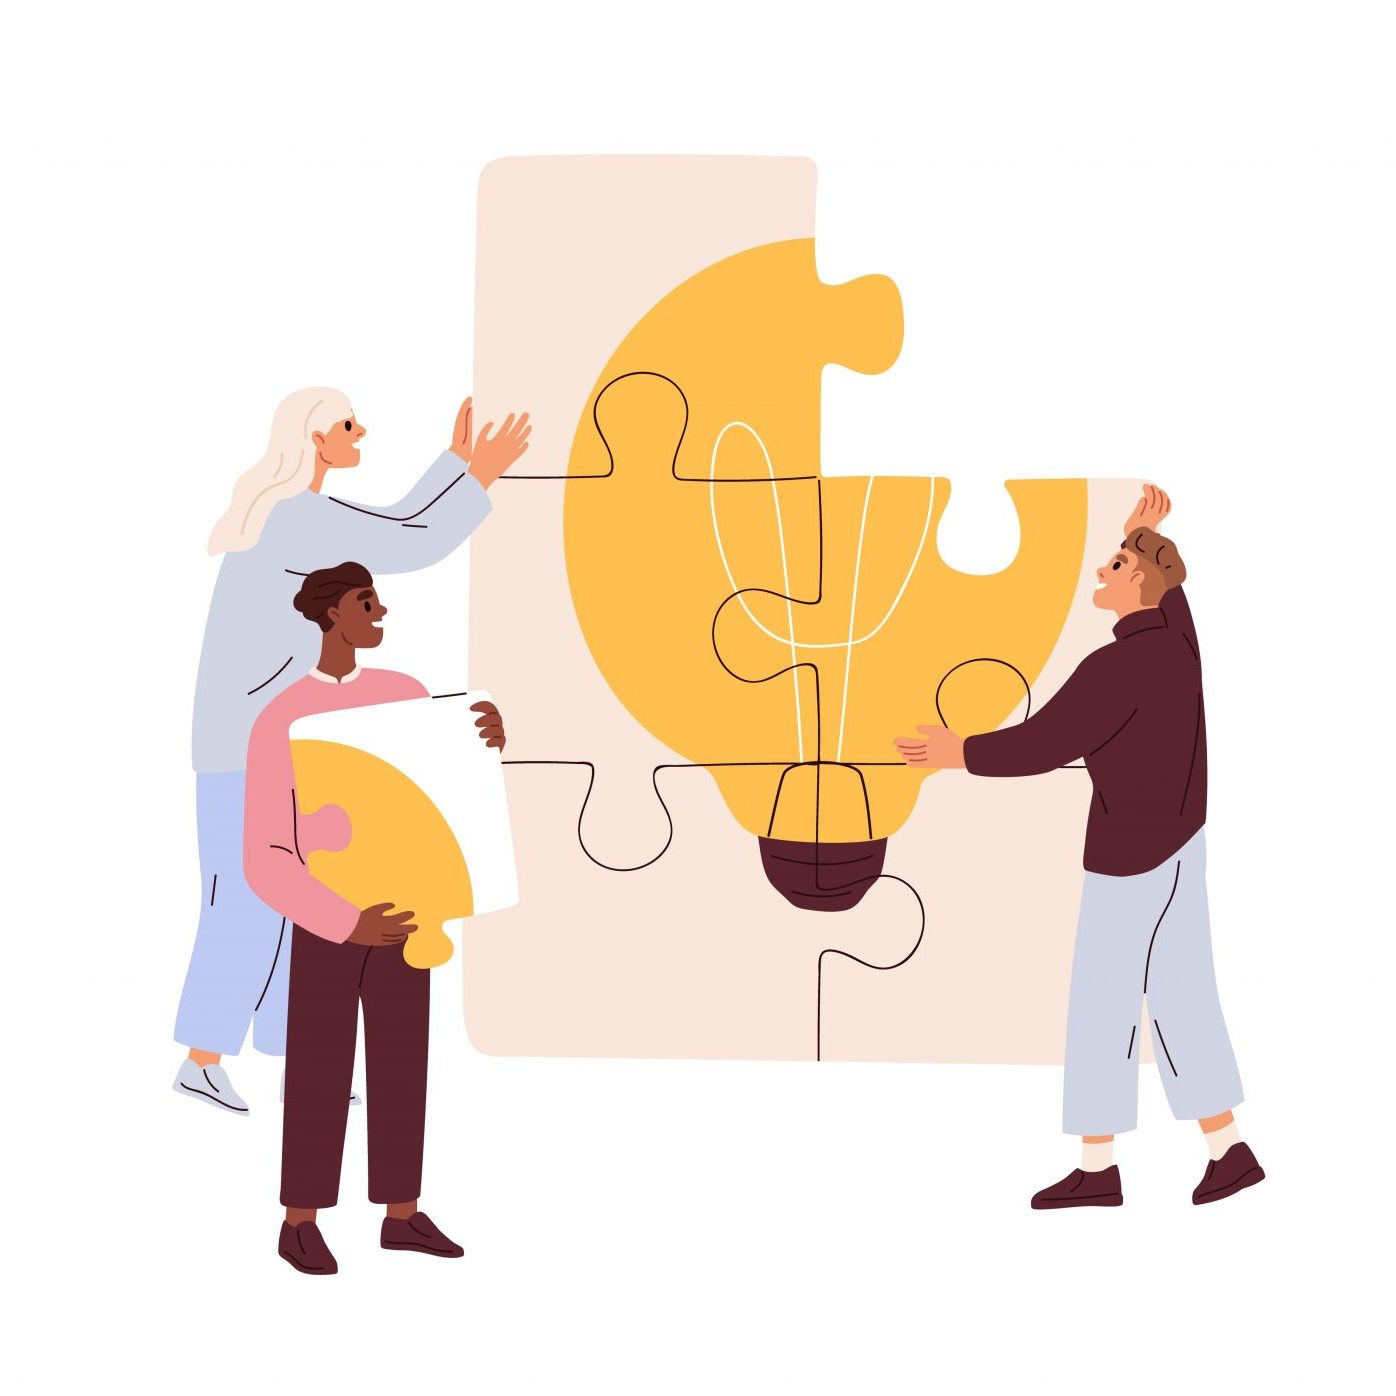 Colourful illustration on white background of group of people working on large puzzle